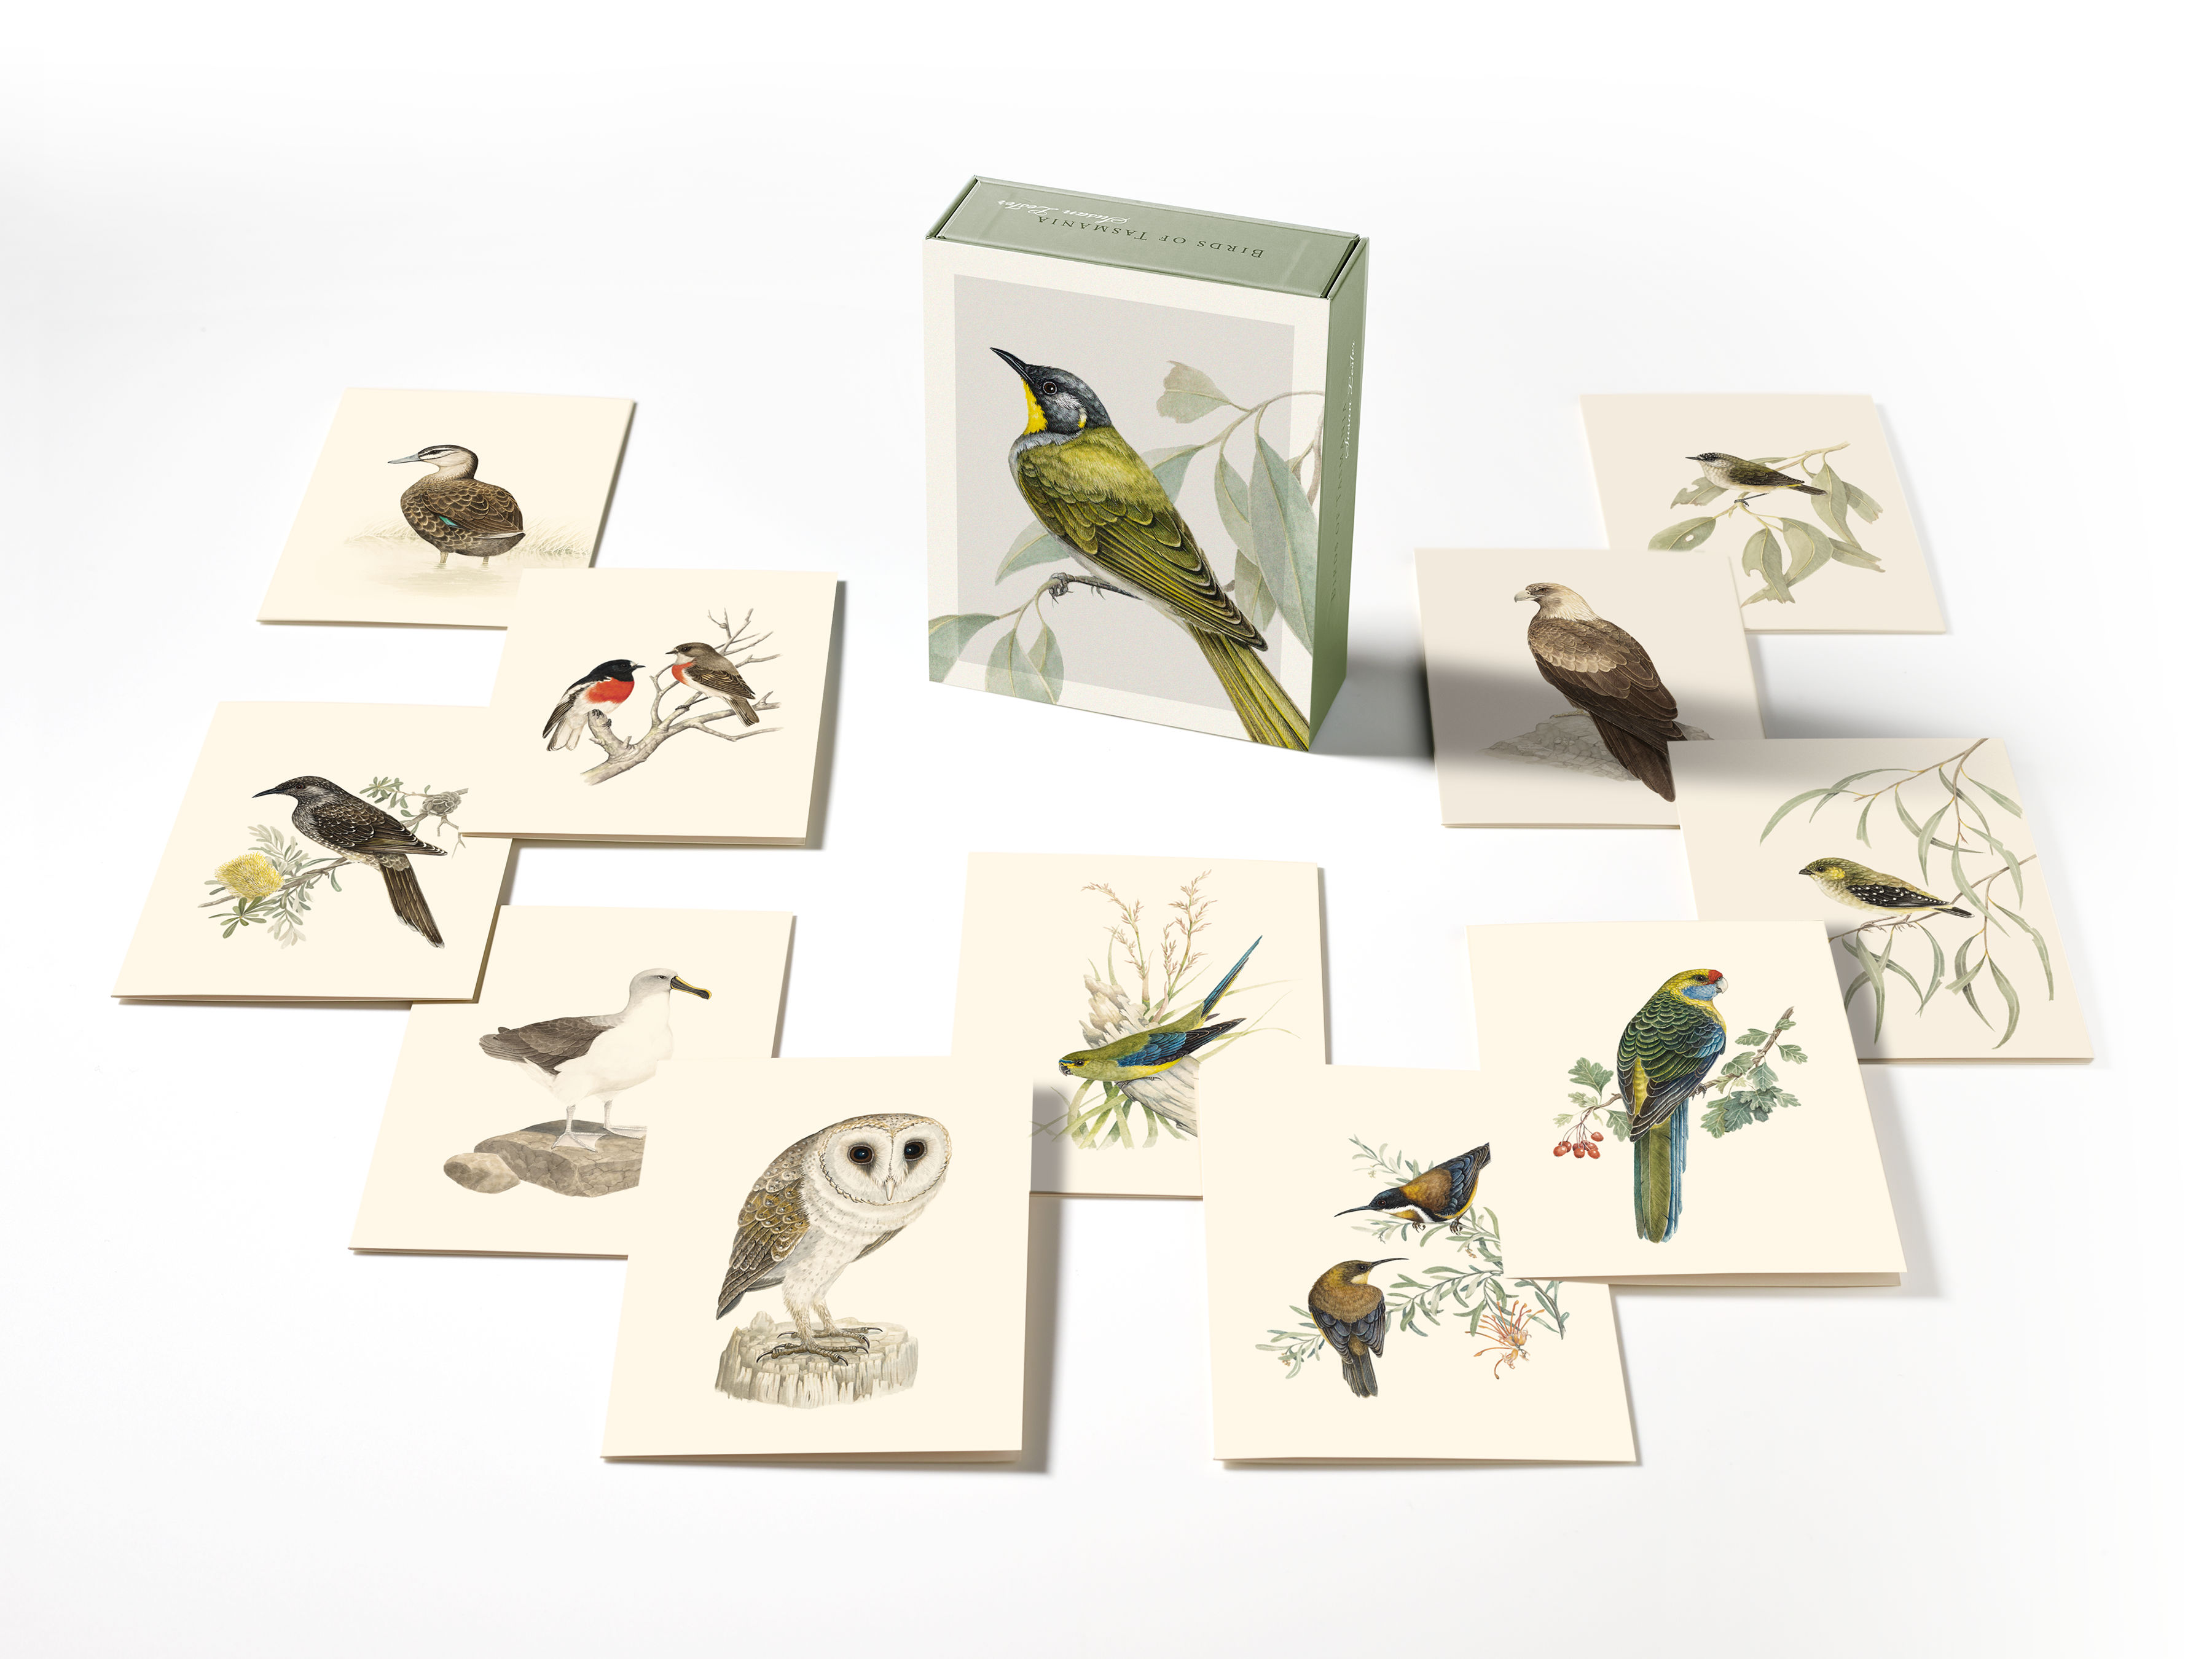 Photograph shows the 12 birds featured in the box set of cards. The cards are laid flat slightly overlapping with the box standing vertical in the centre. Photo: Peter Whyte.